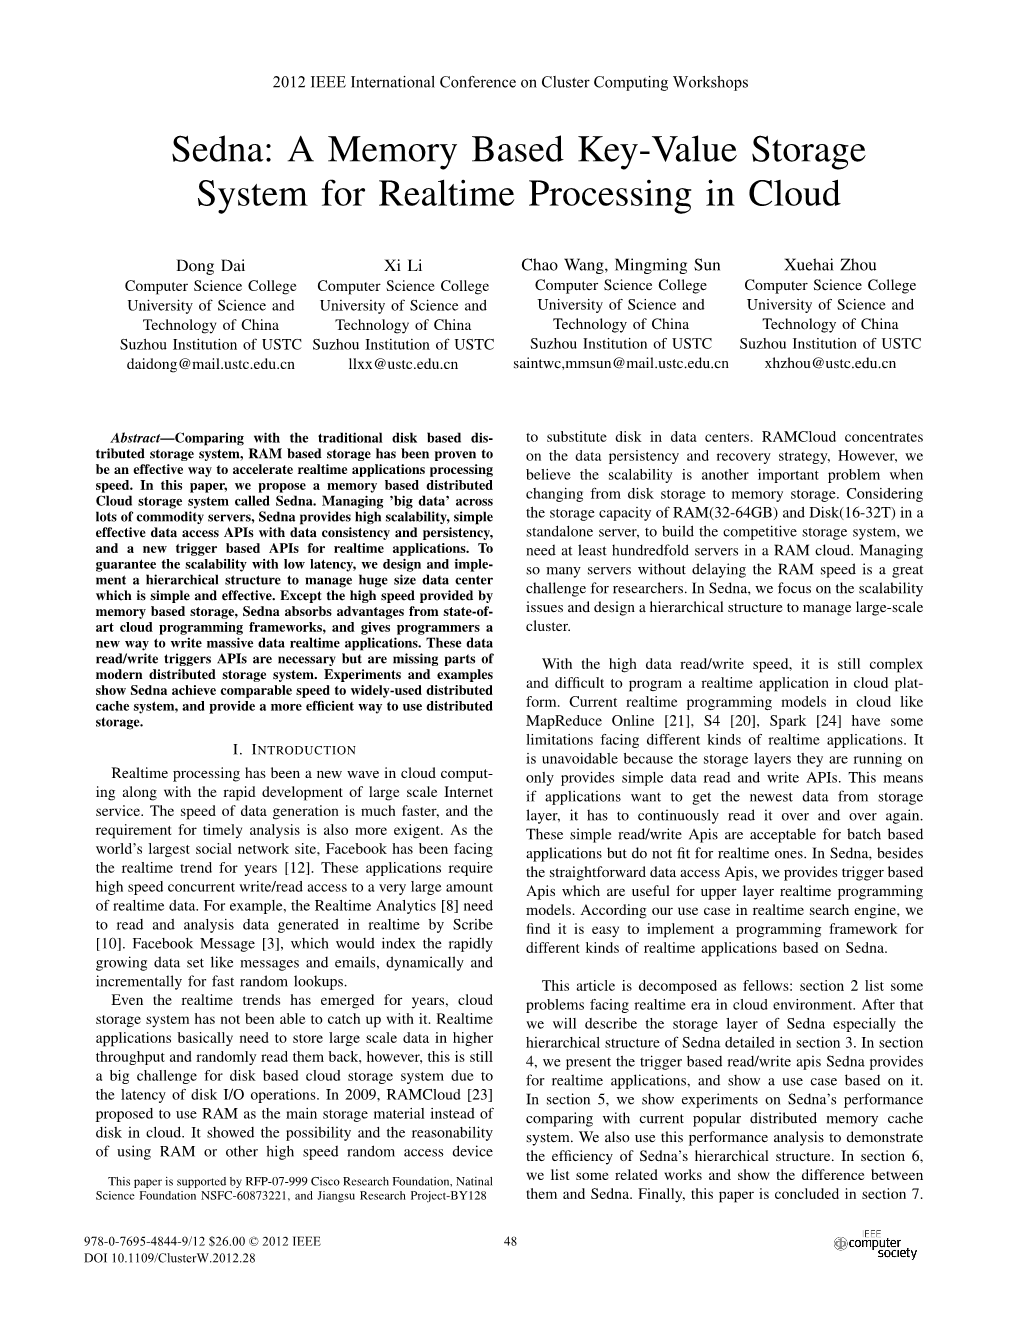 Sedna: a Memory Based Key-Value Storage System for Realtime Processing in Cloud